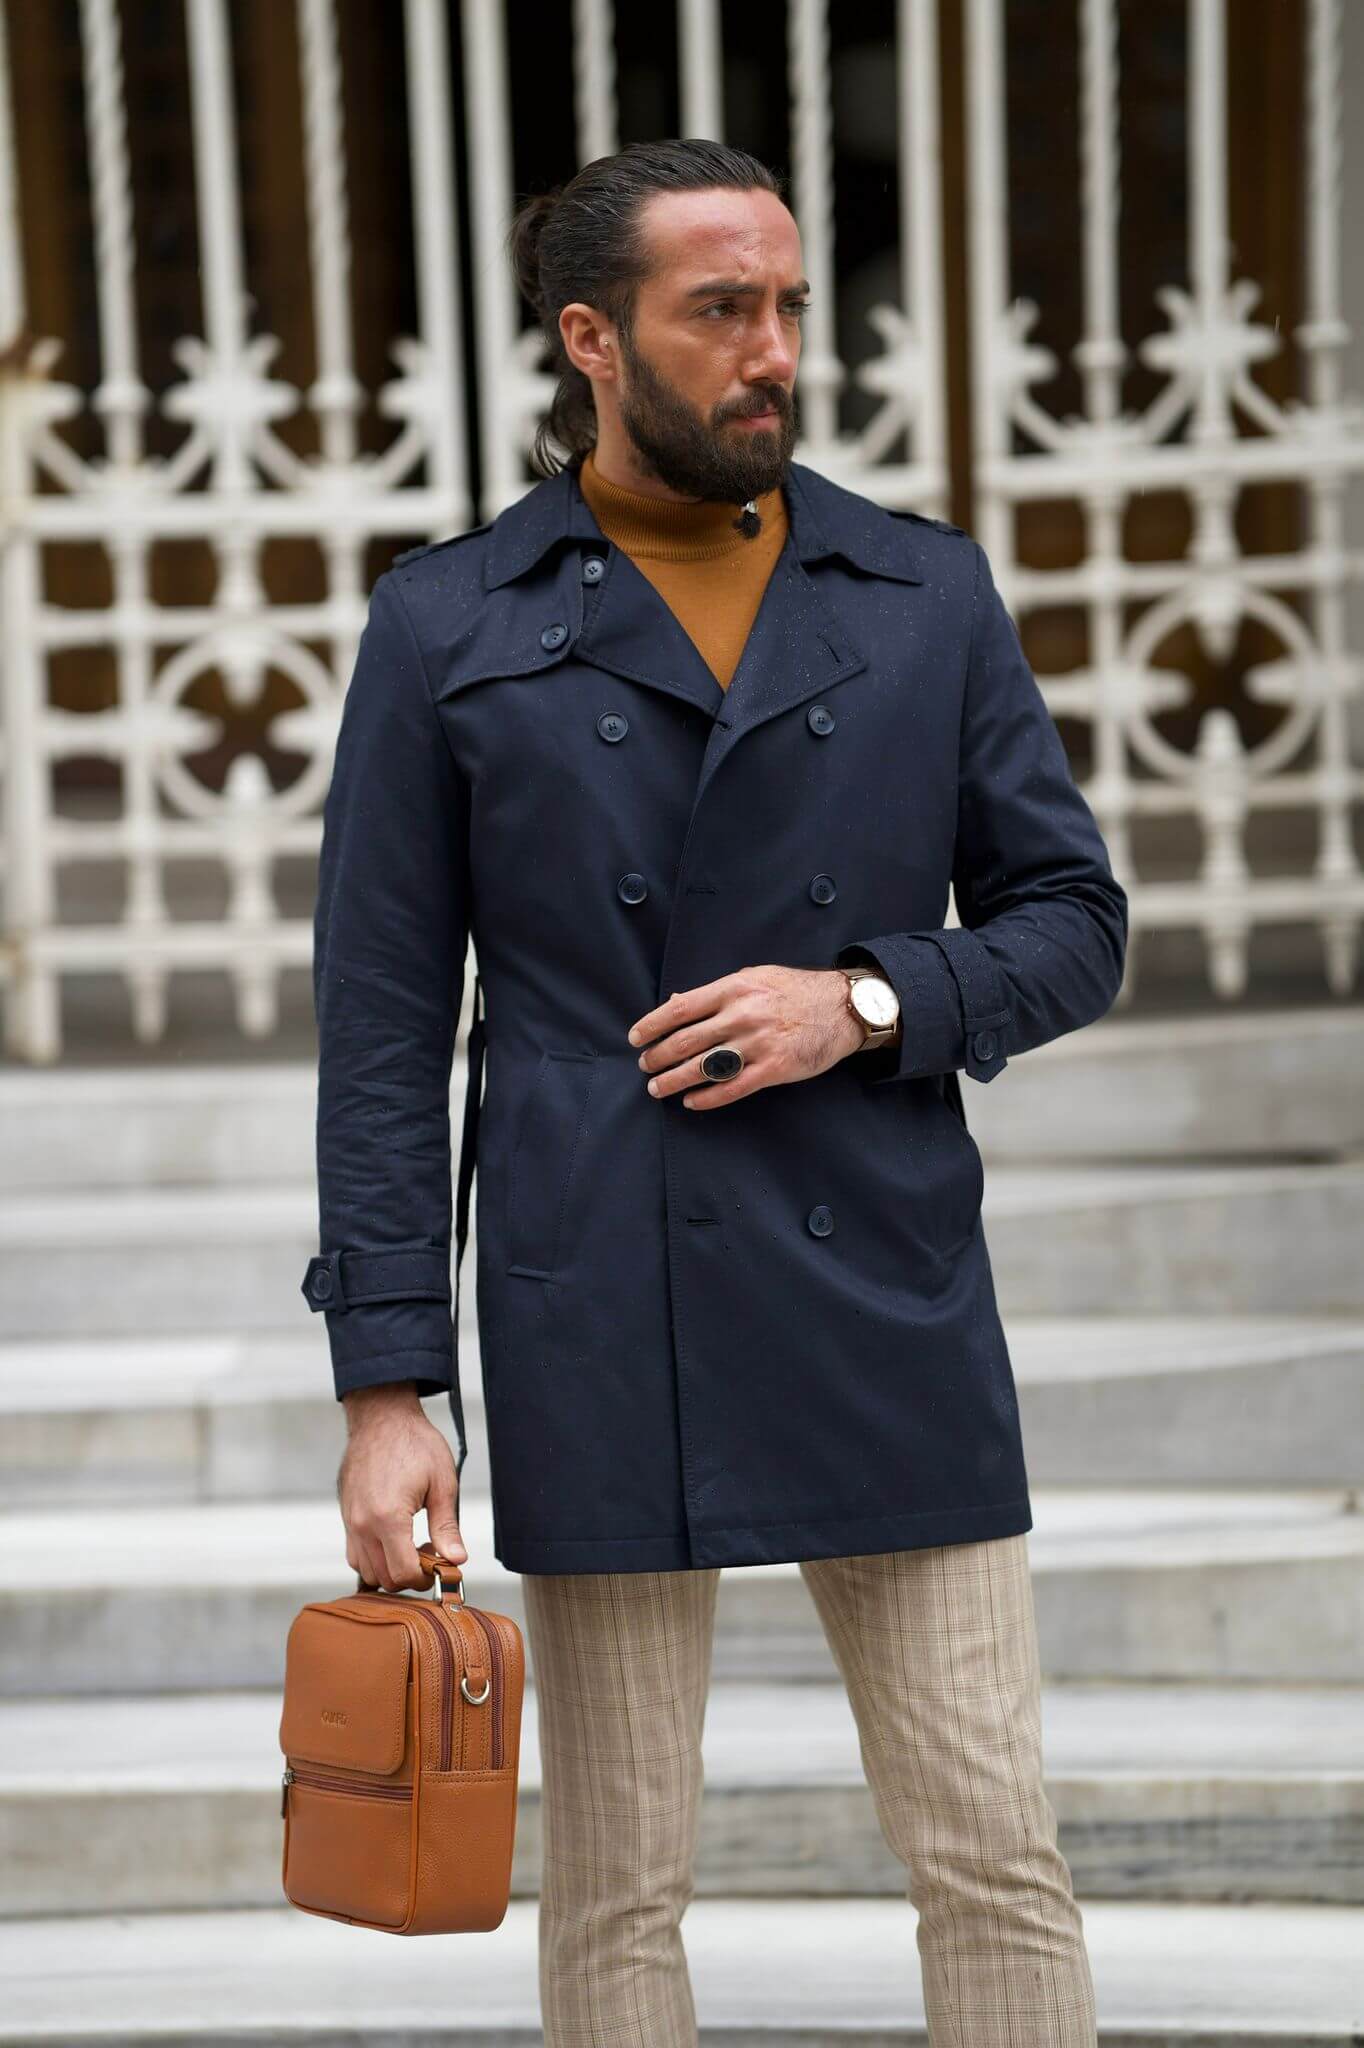 Dark blue trench coat with a belted waist for a flattering fit